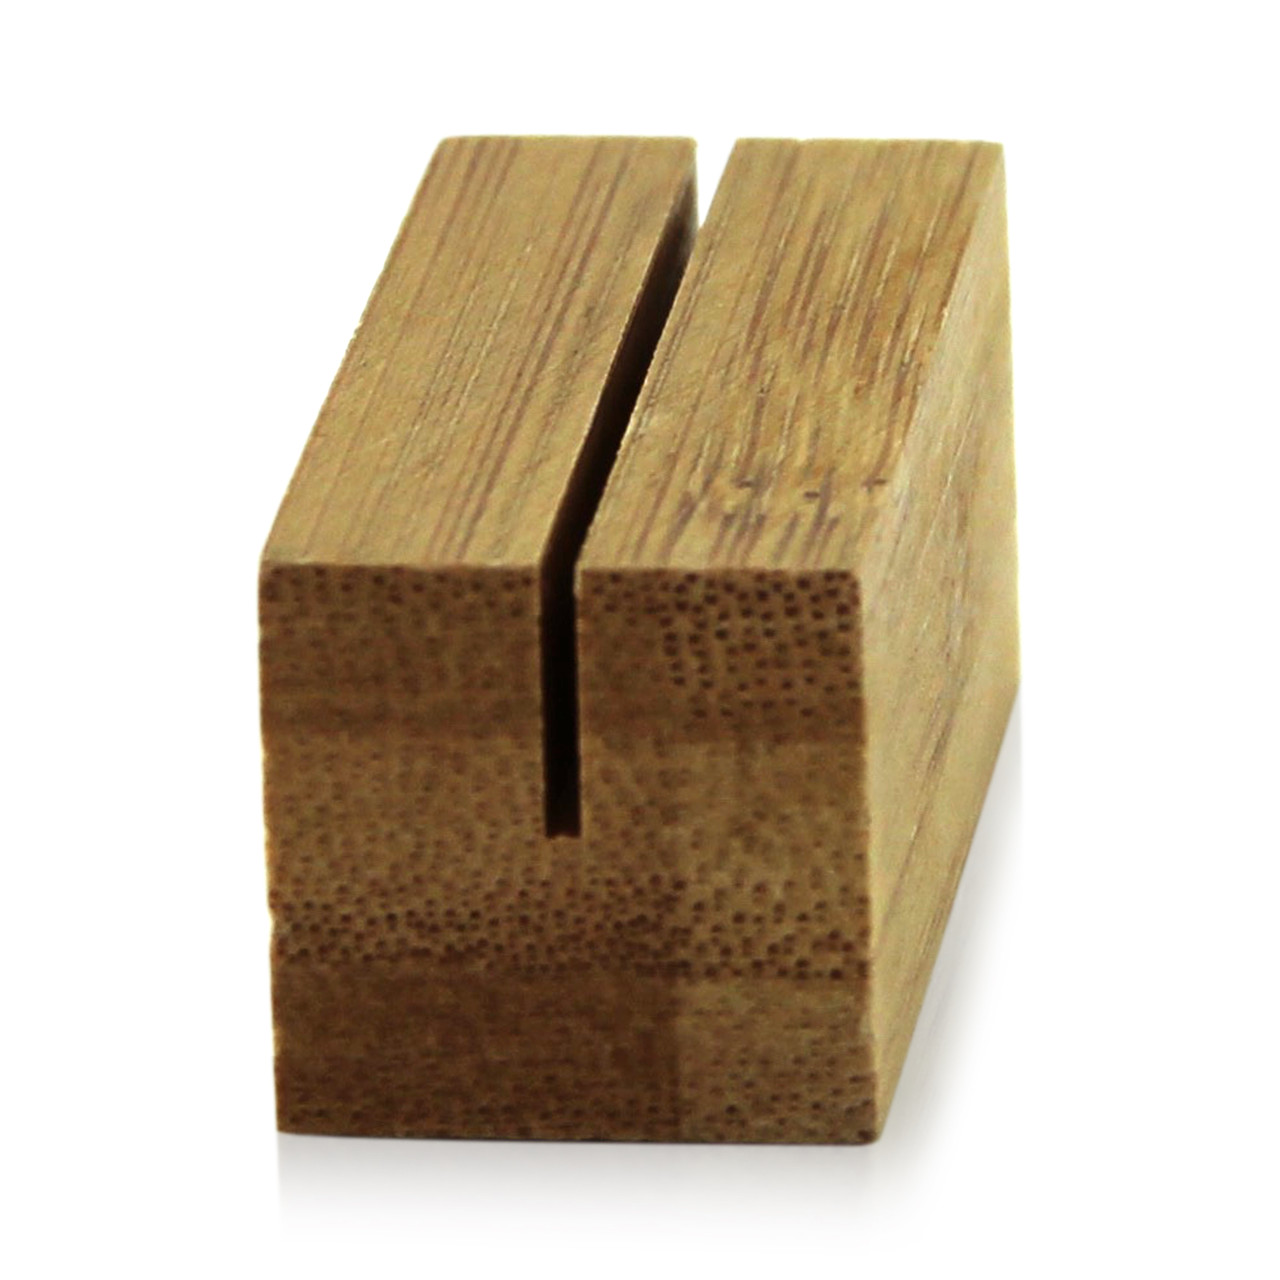 Bamboo Square Card Holder - L:2.2 x W:.78 x H:.78in